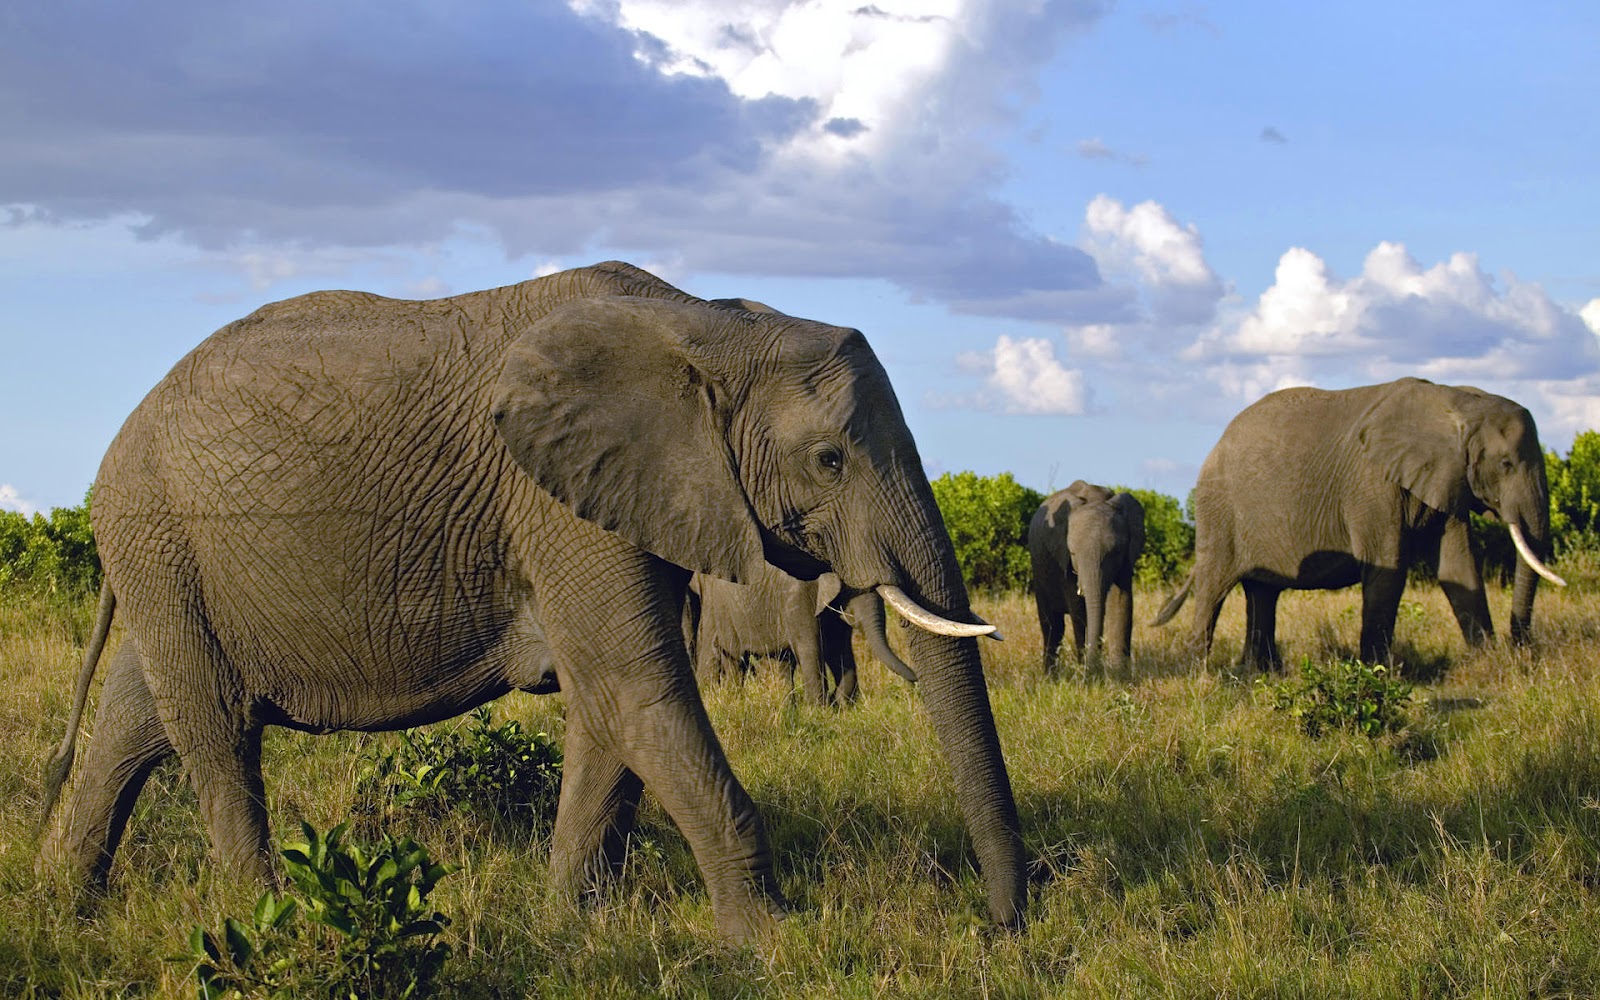  elephants wallpapers with a group of elephants wallpaper backgrounds